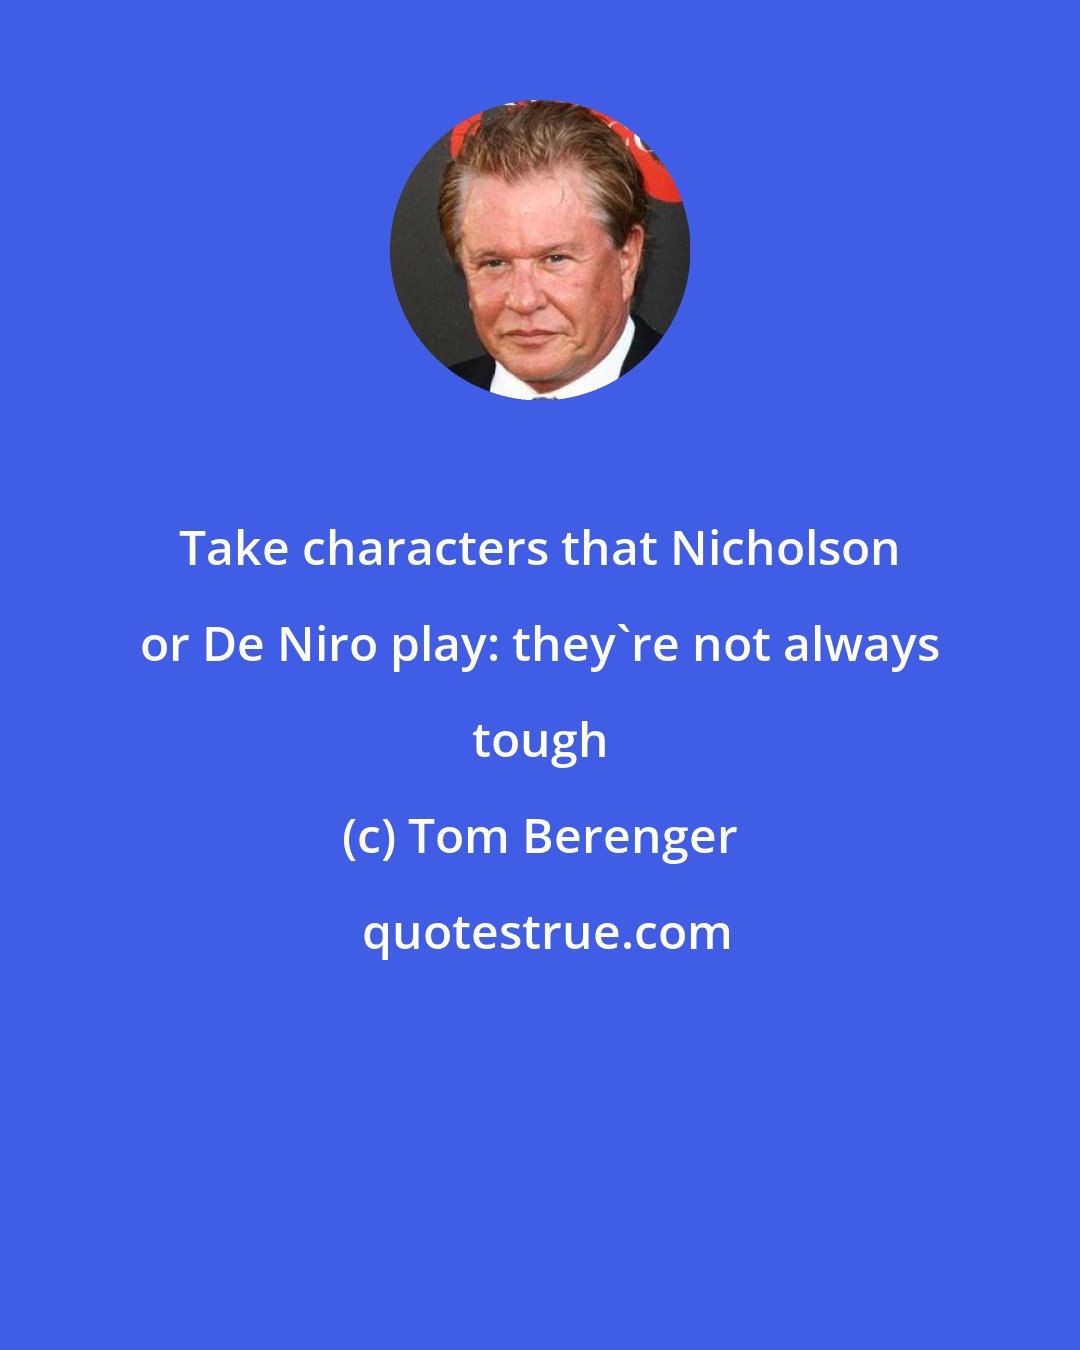 Tom Berenger: Take characters that Nicholson or De Niro play: they're not always tough